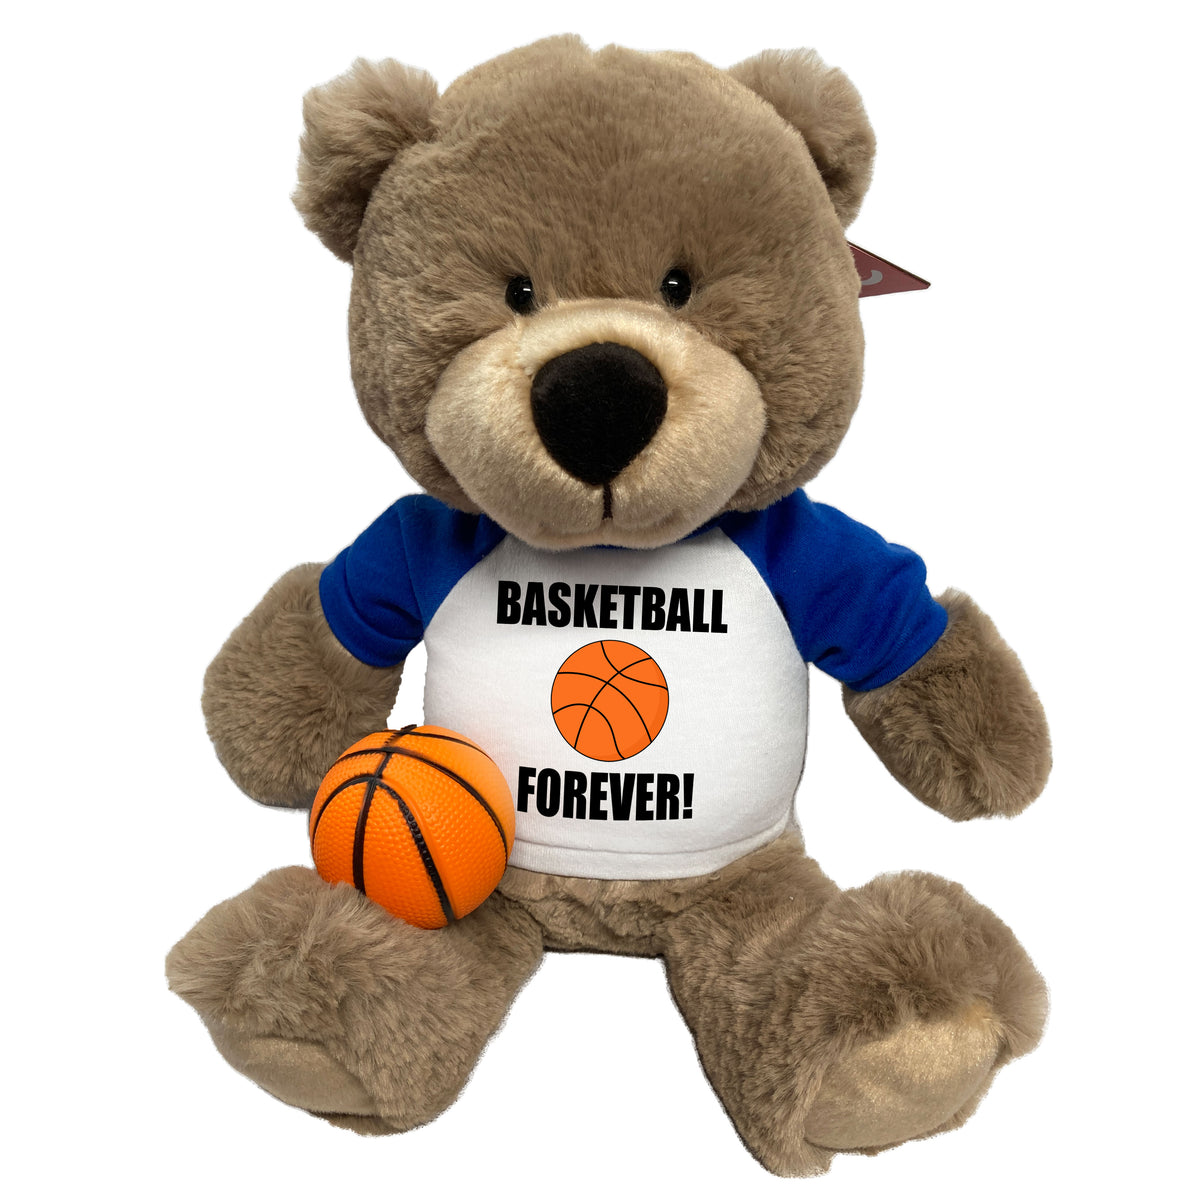 Basketball Teddy Bear - Personalized 14" Taupe Bear